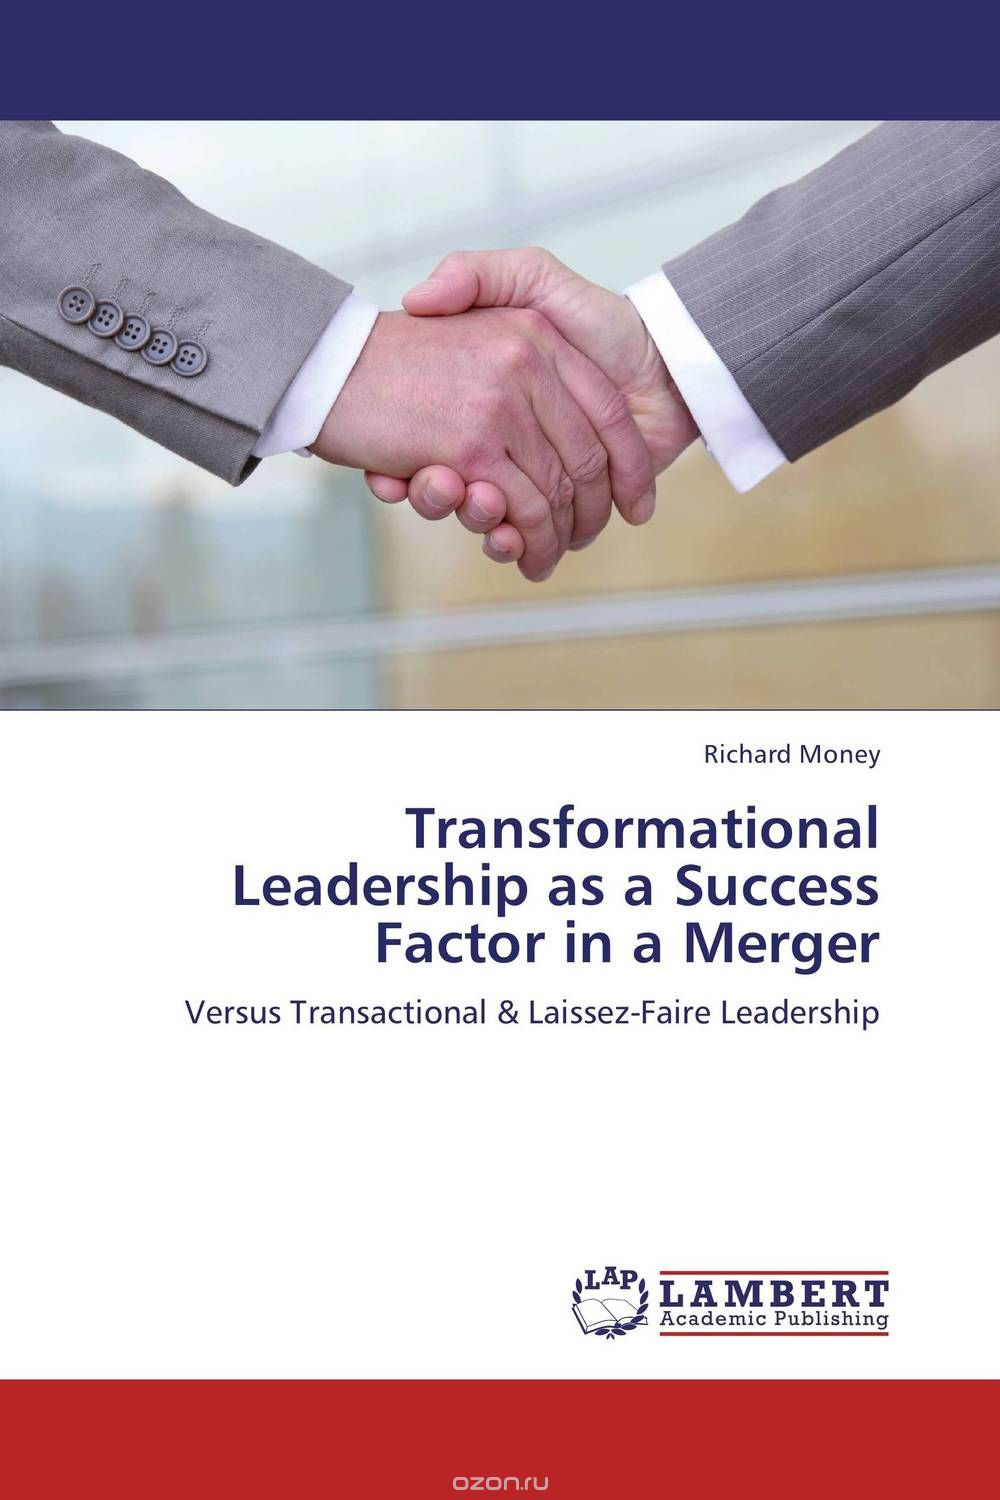 Transformational Leadership as a Success Factor in a Merger